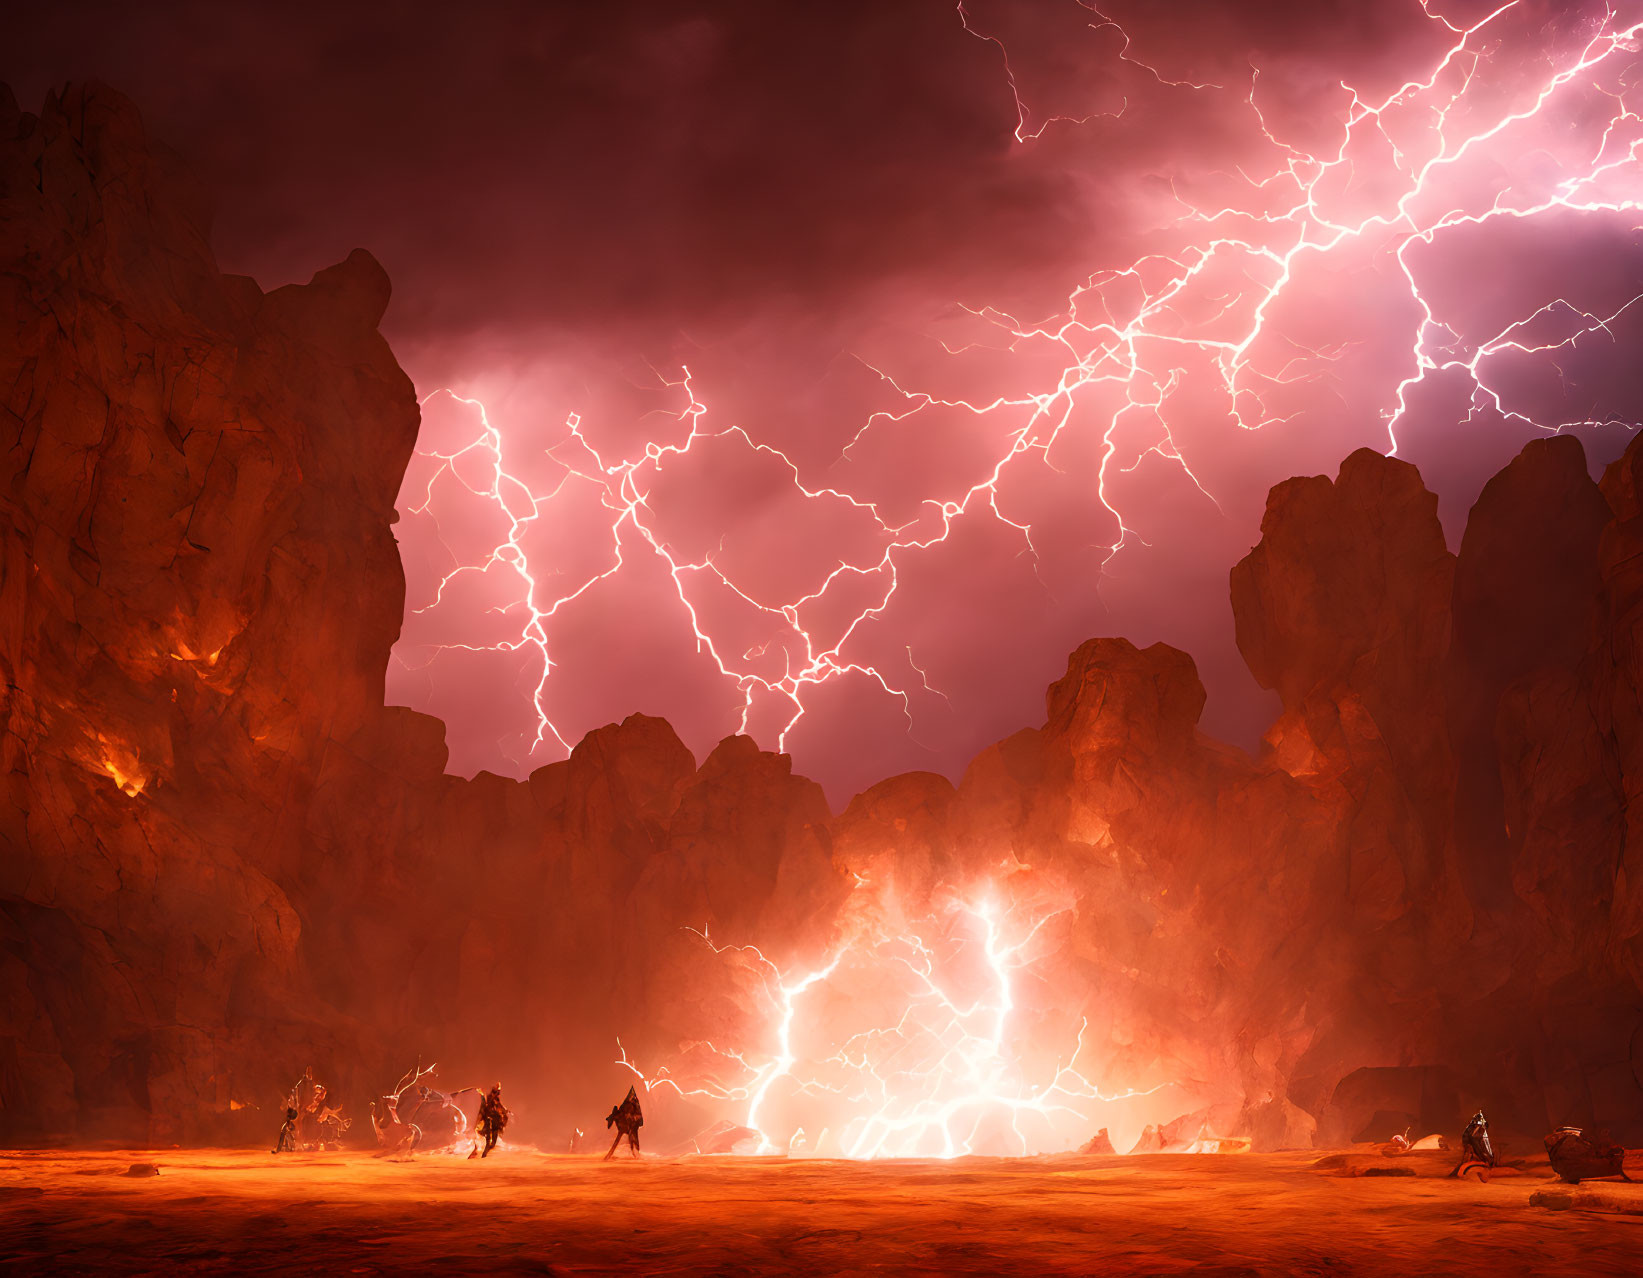 Stormy Canyon Landscape with Lightning Bolts and Silhouetted Figures